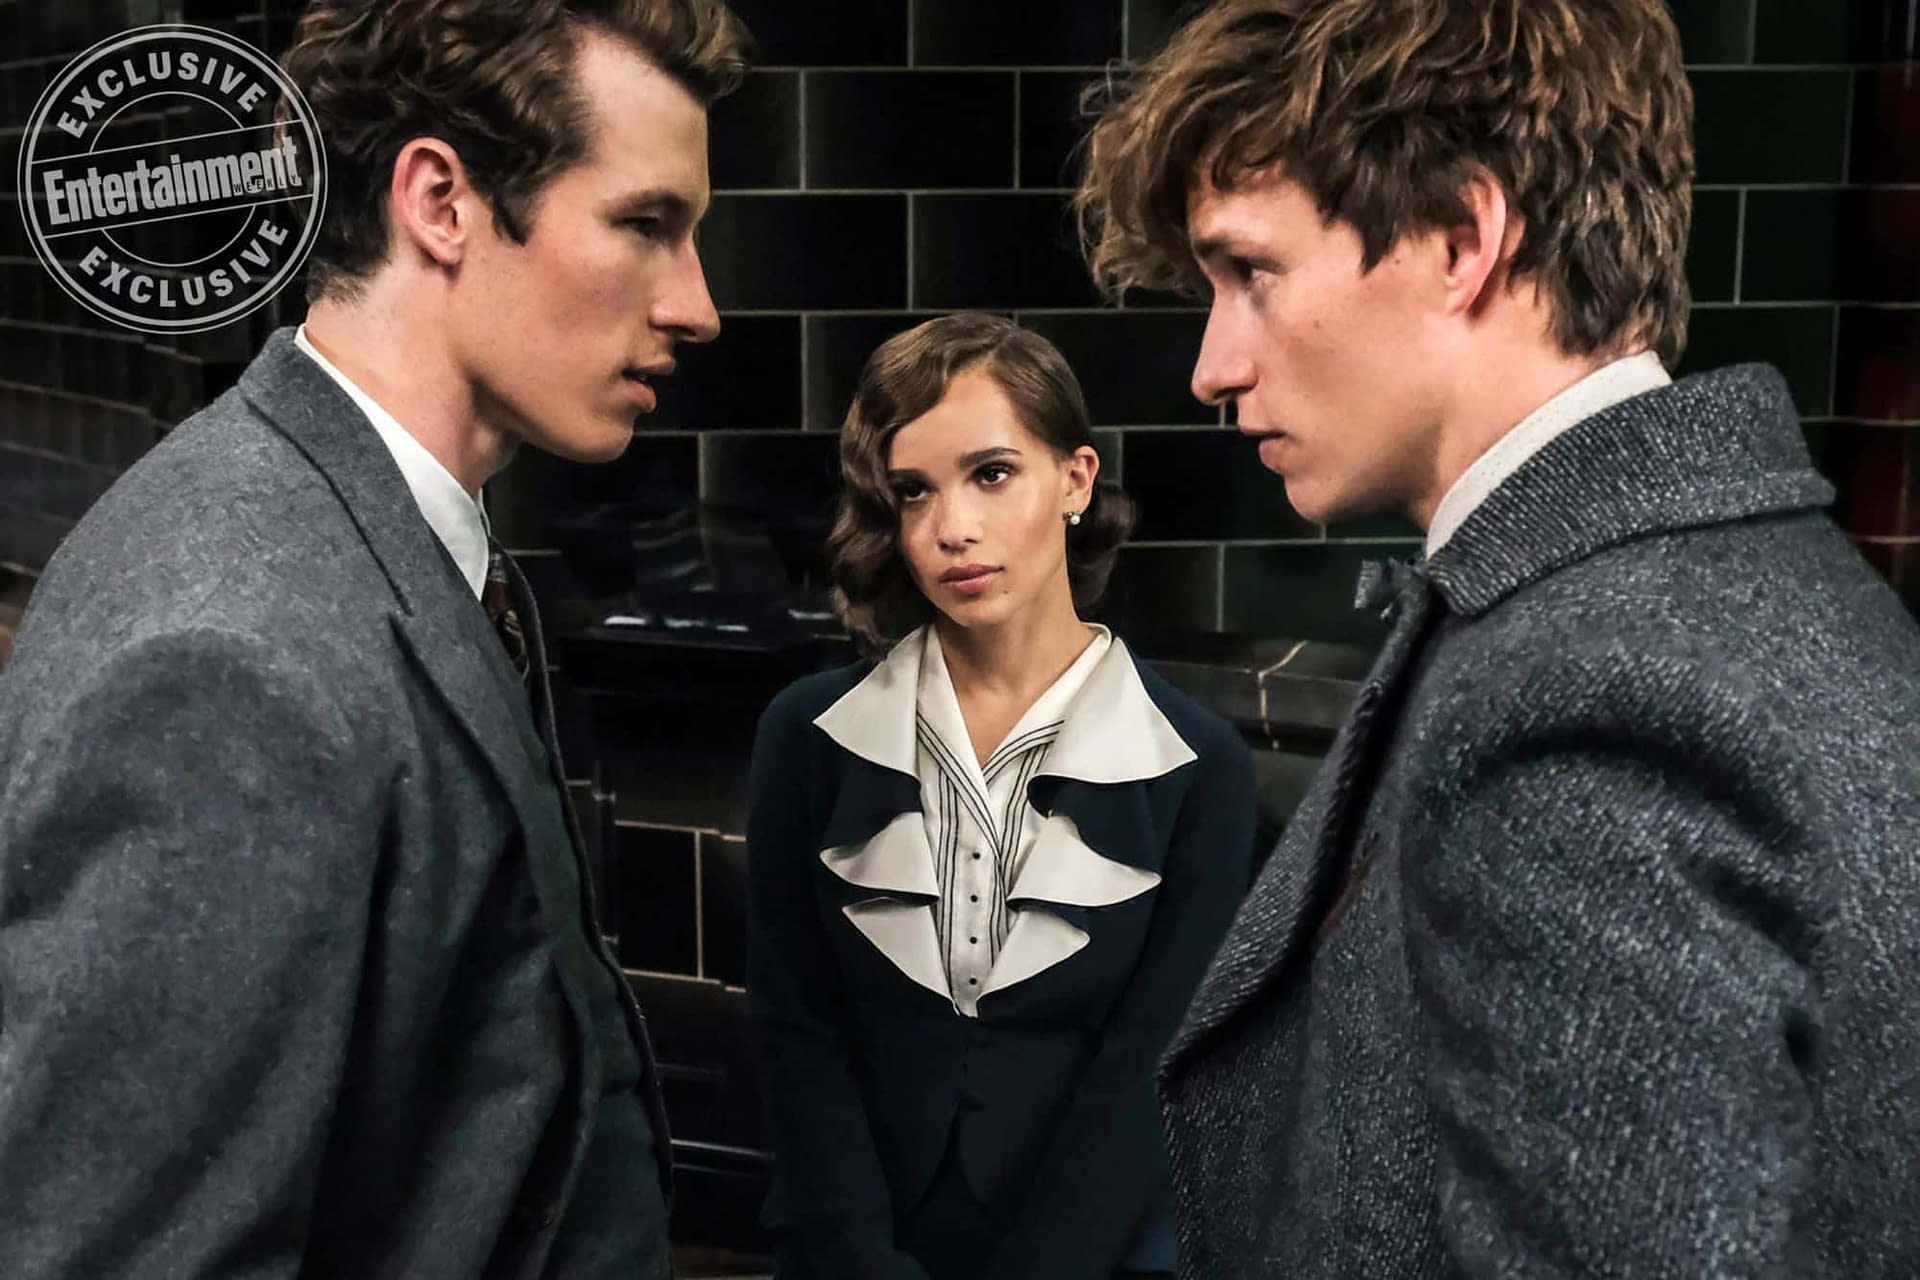 Details Revealed in Fantastic Beasts: The Crimes of Grindelwald Character Descriptions